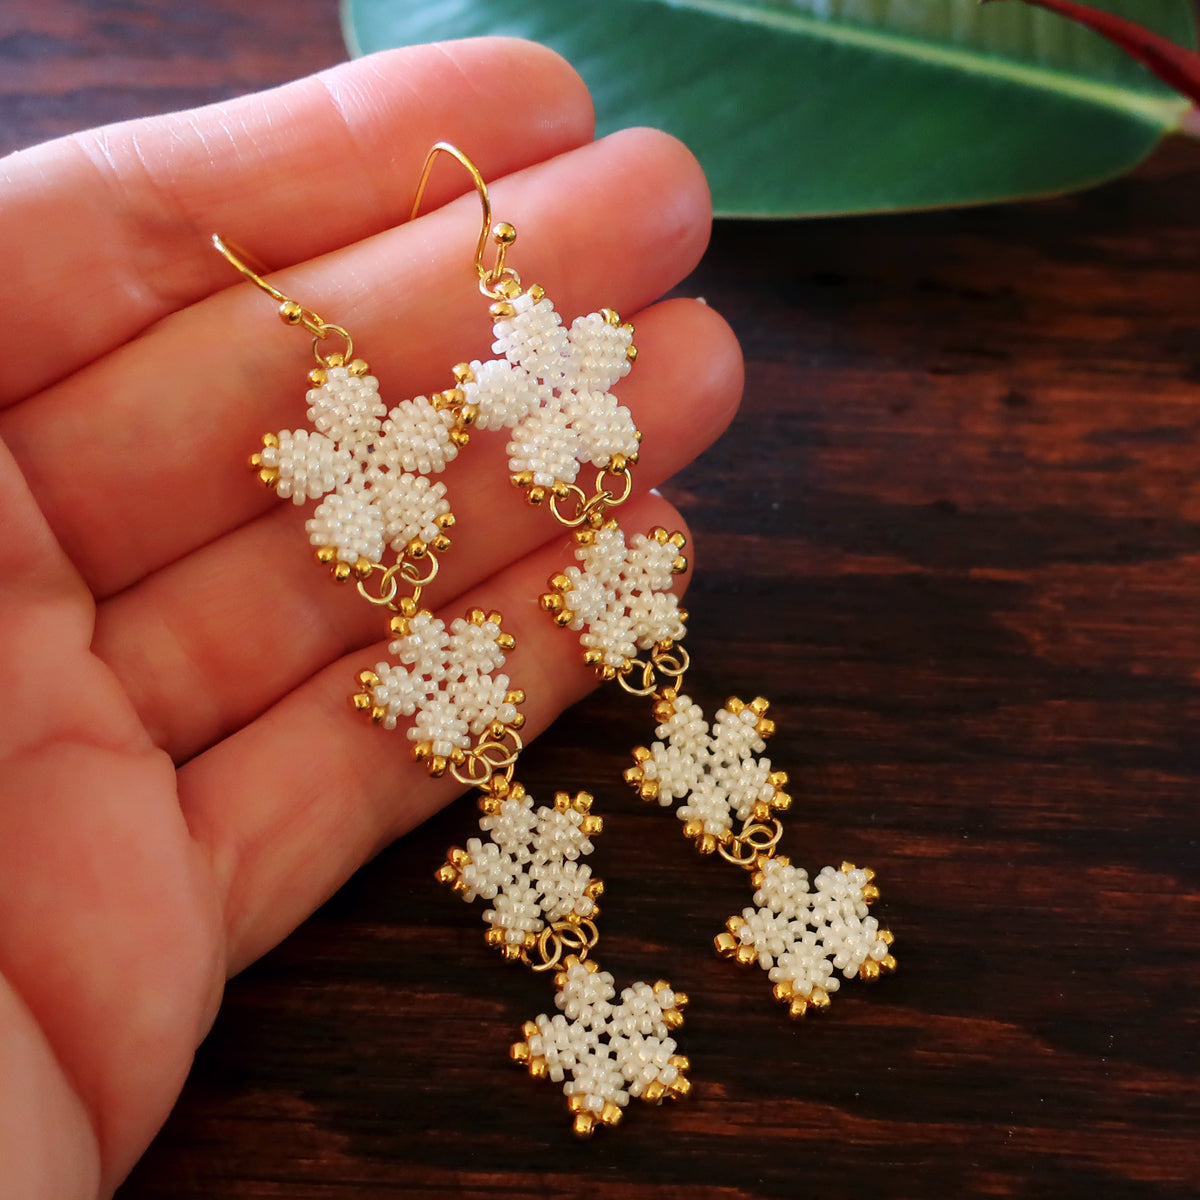 Heart in Hawaii 4x Plumeria Beaded Long Dangles - Pearly White with Gold